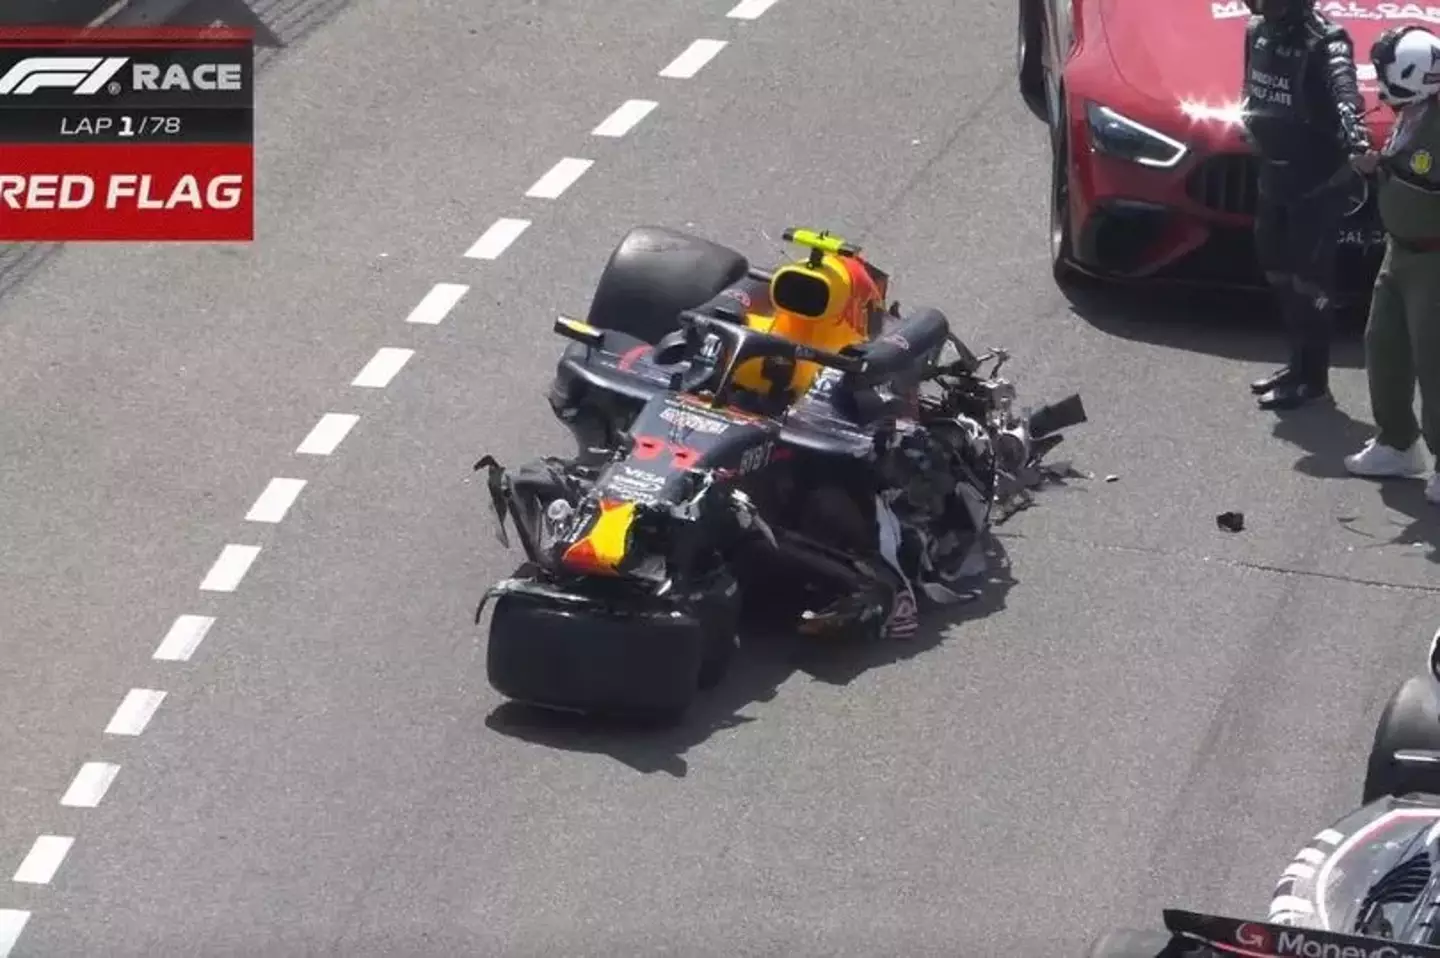 The crash looked brutal. (F1 TV)